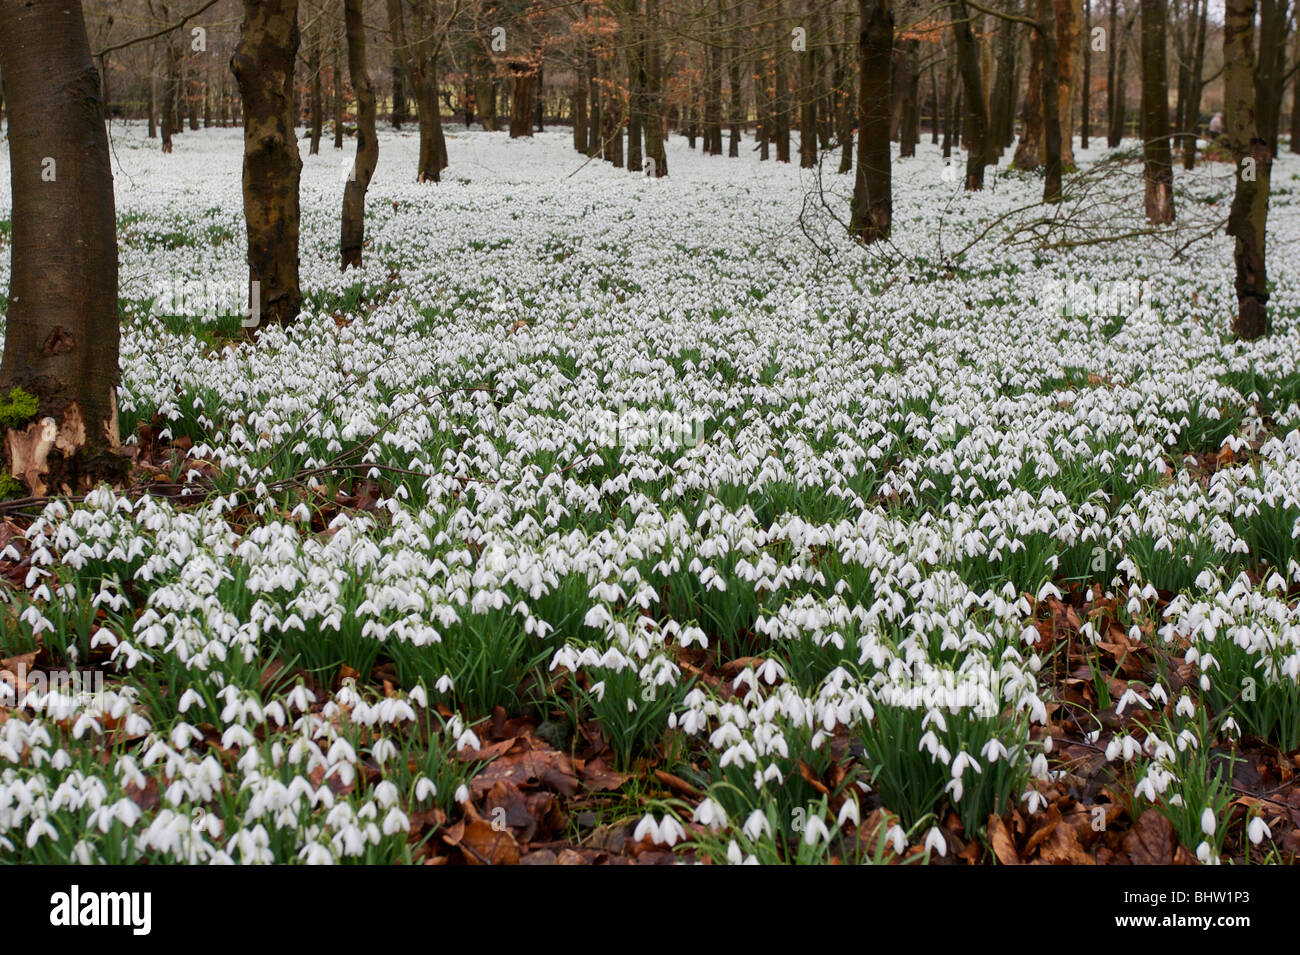 snowdrops in forest, welford england Stock Photo